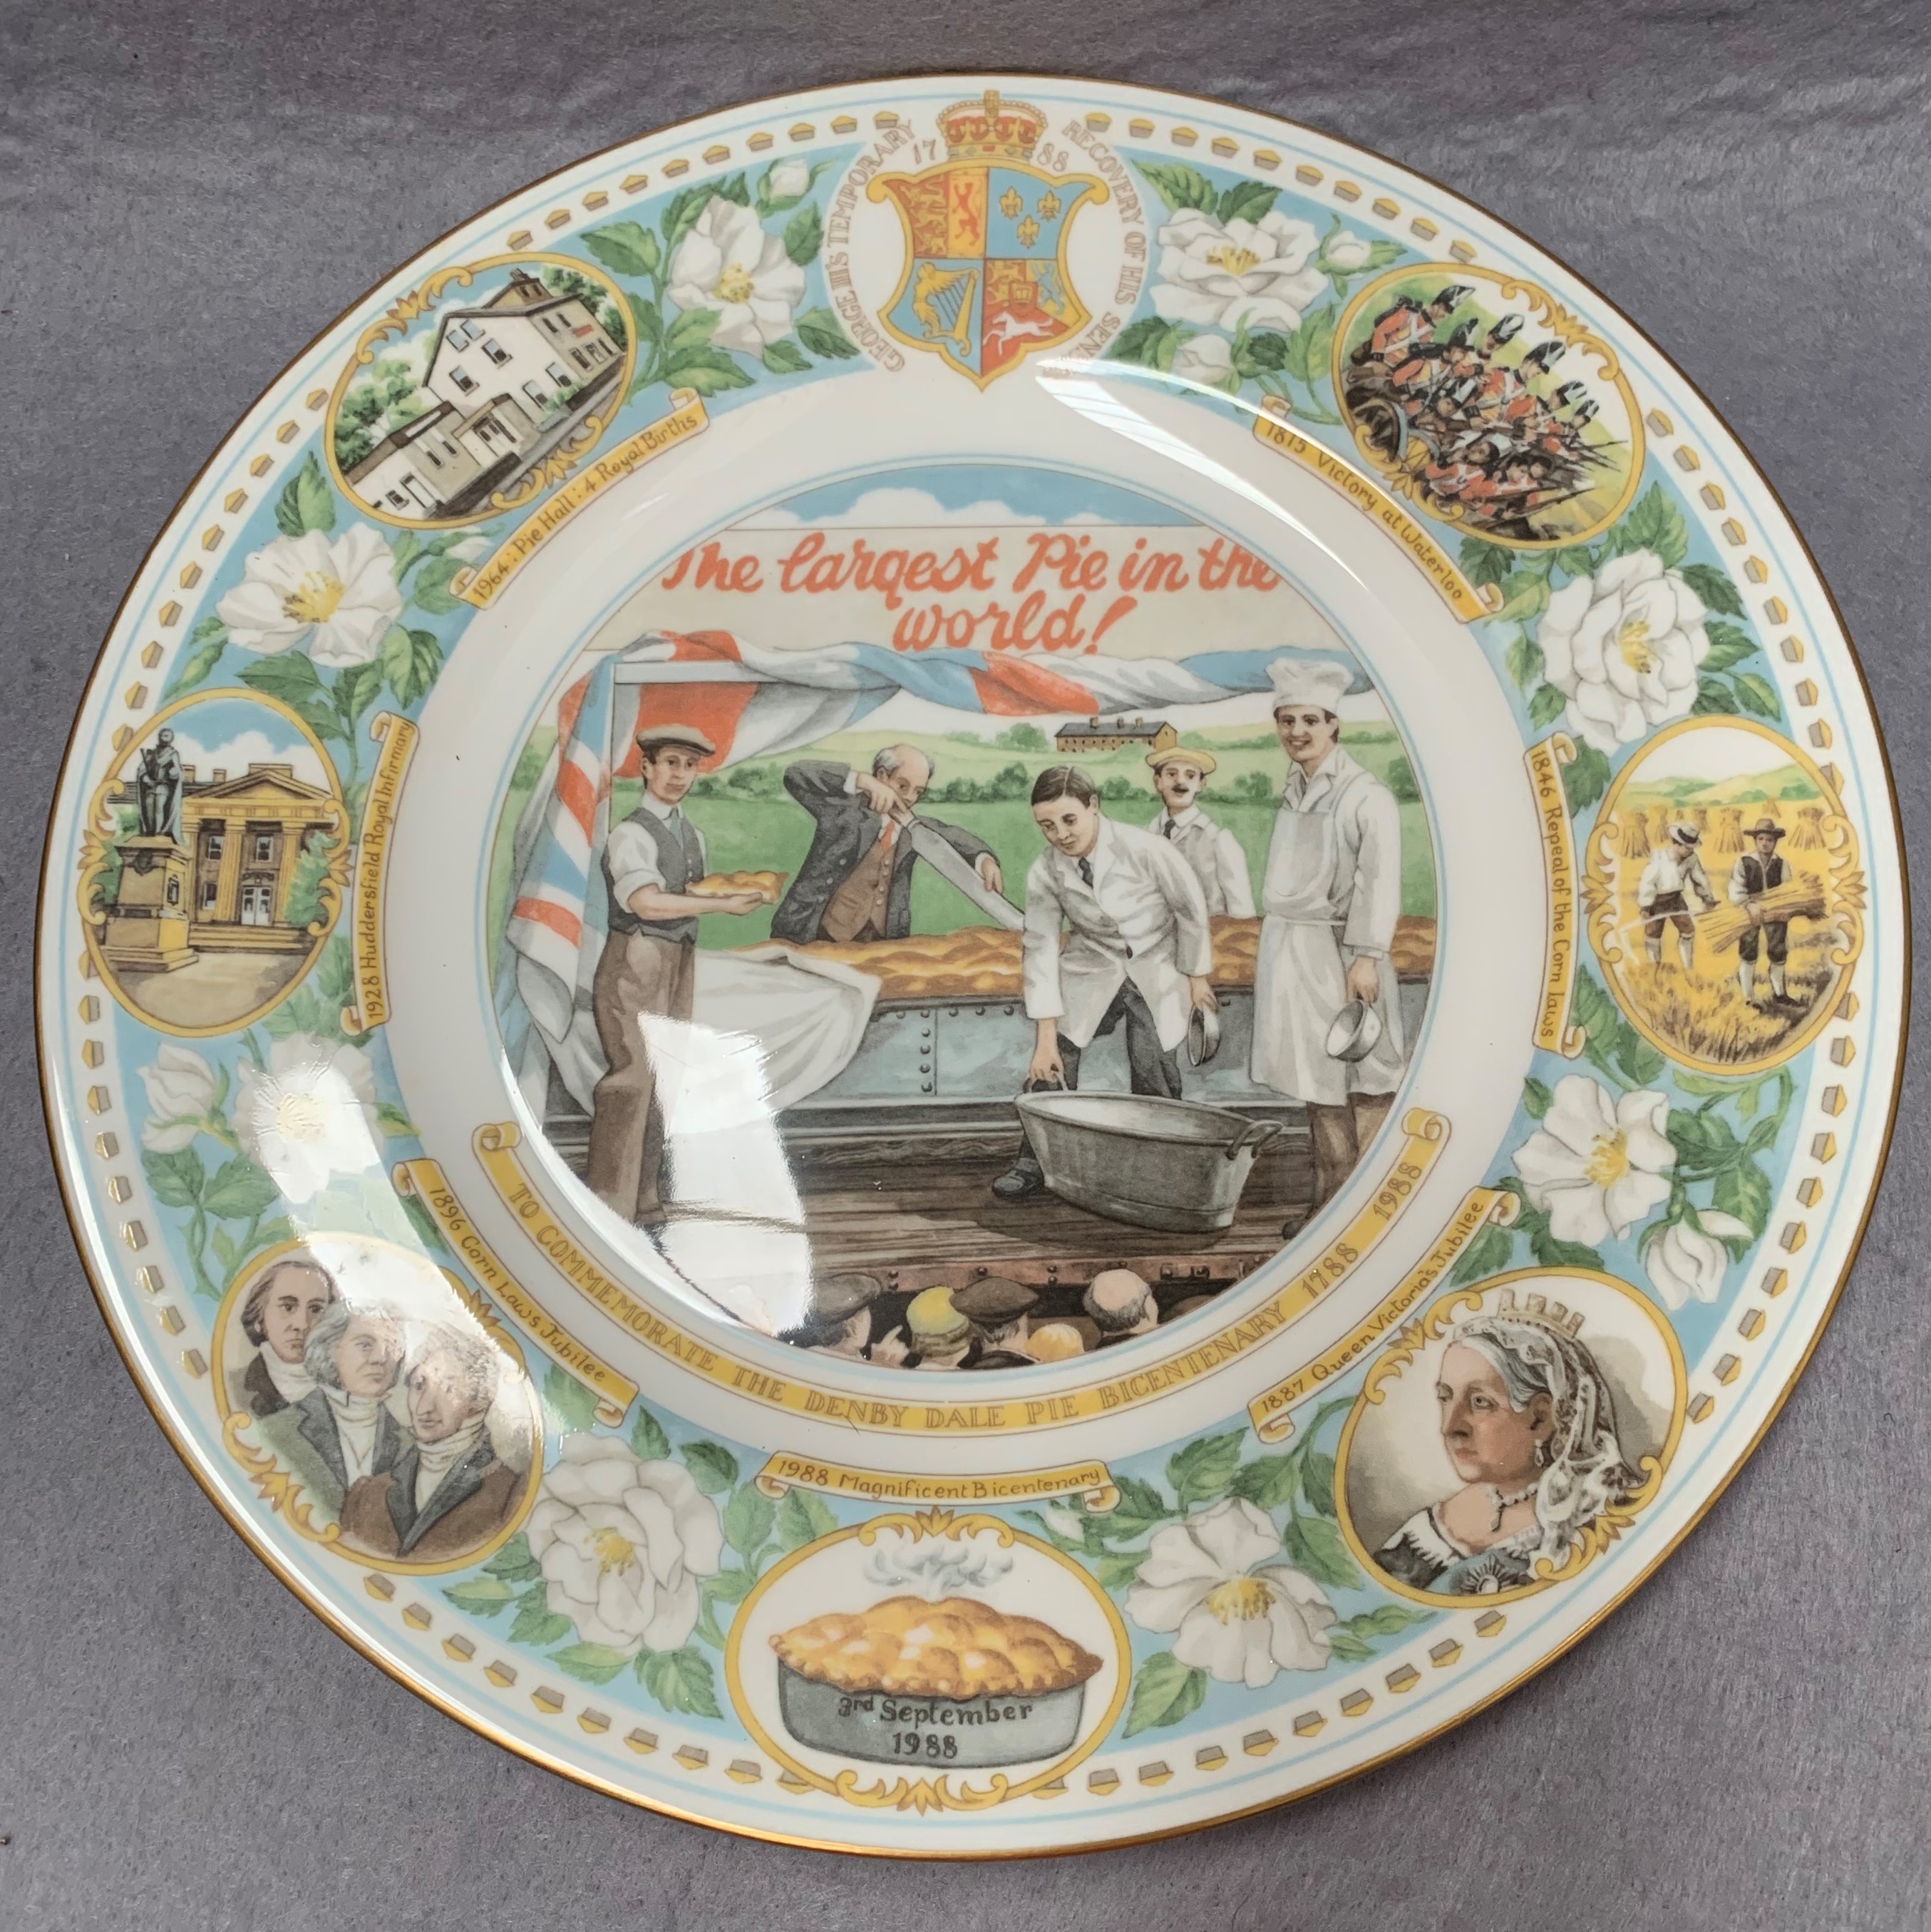 Coalport Denby Dale pie plate to commemorate the bicentenary of the Denby Dale pie 1788-1988 - Image 2 of 2